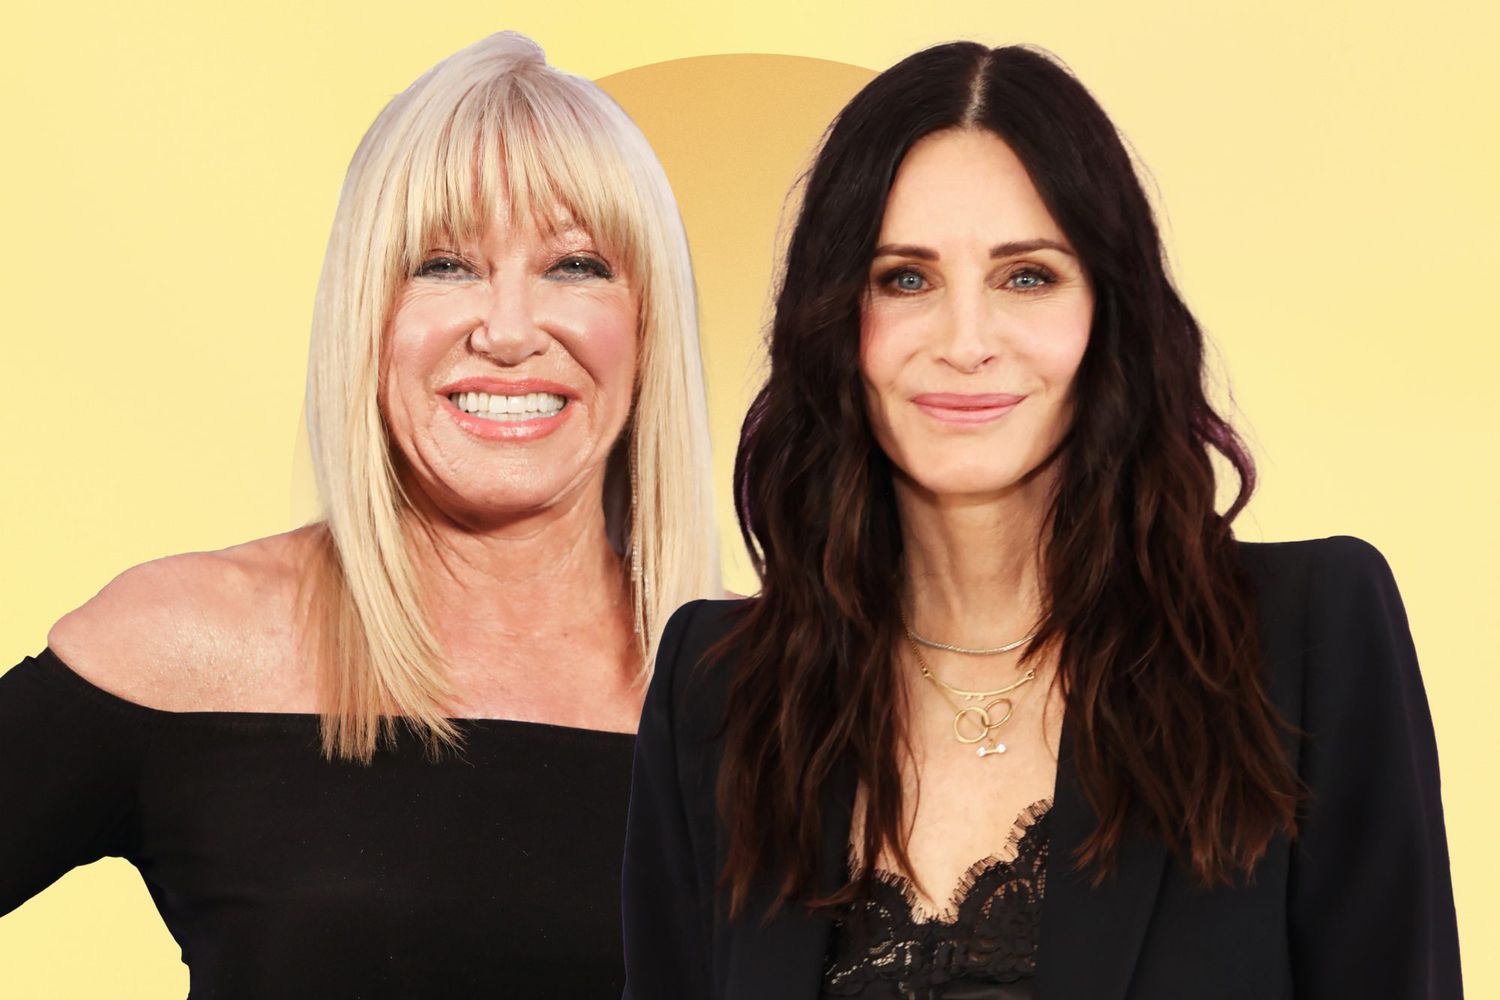 Courtney Cox and Suzanne Somers against a yellow background